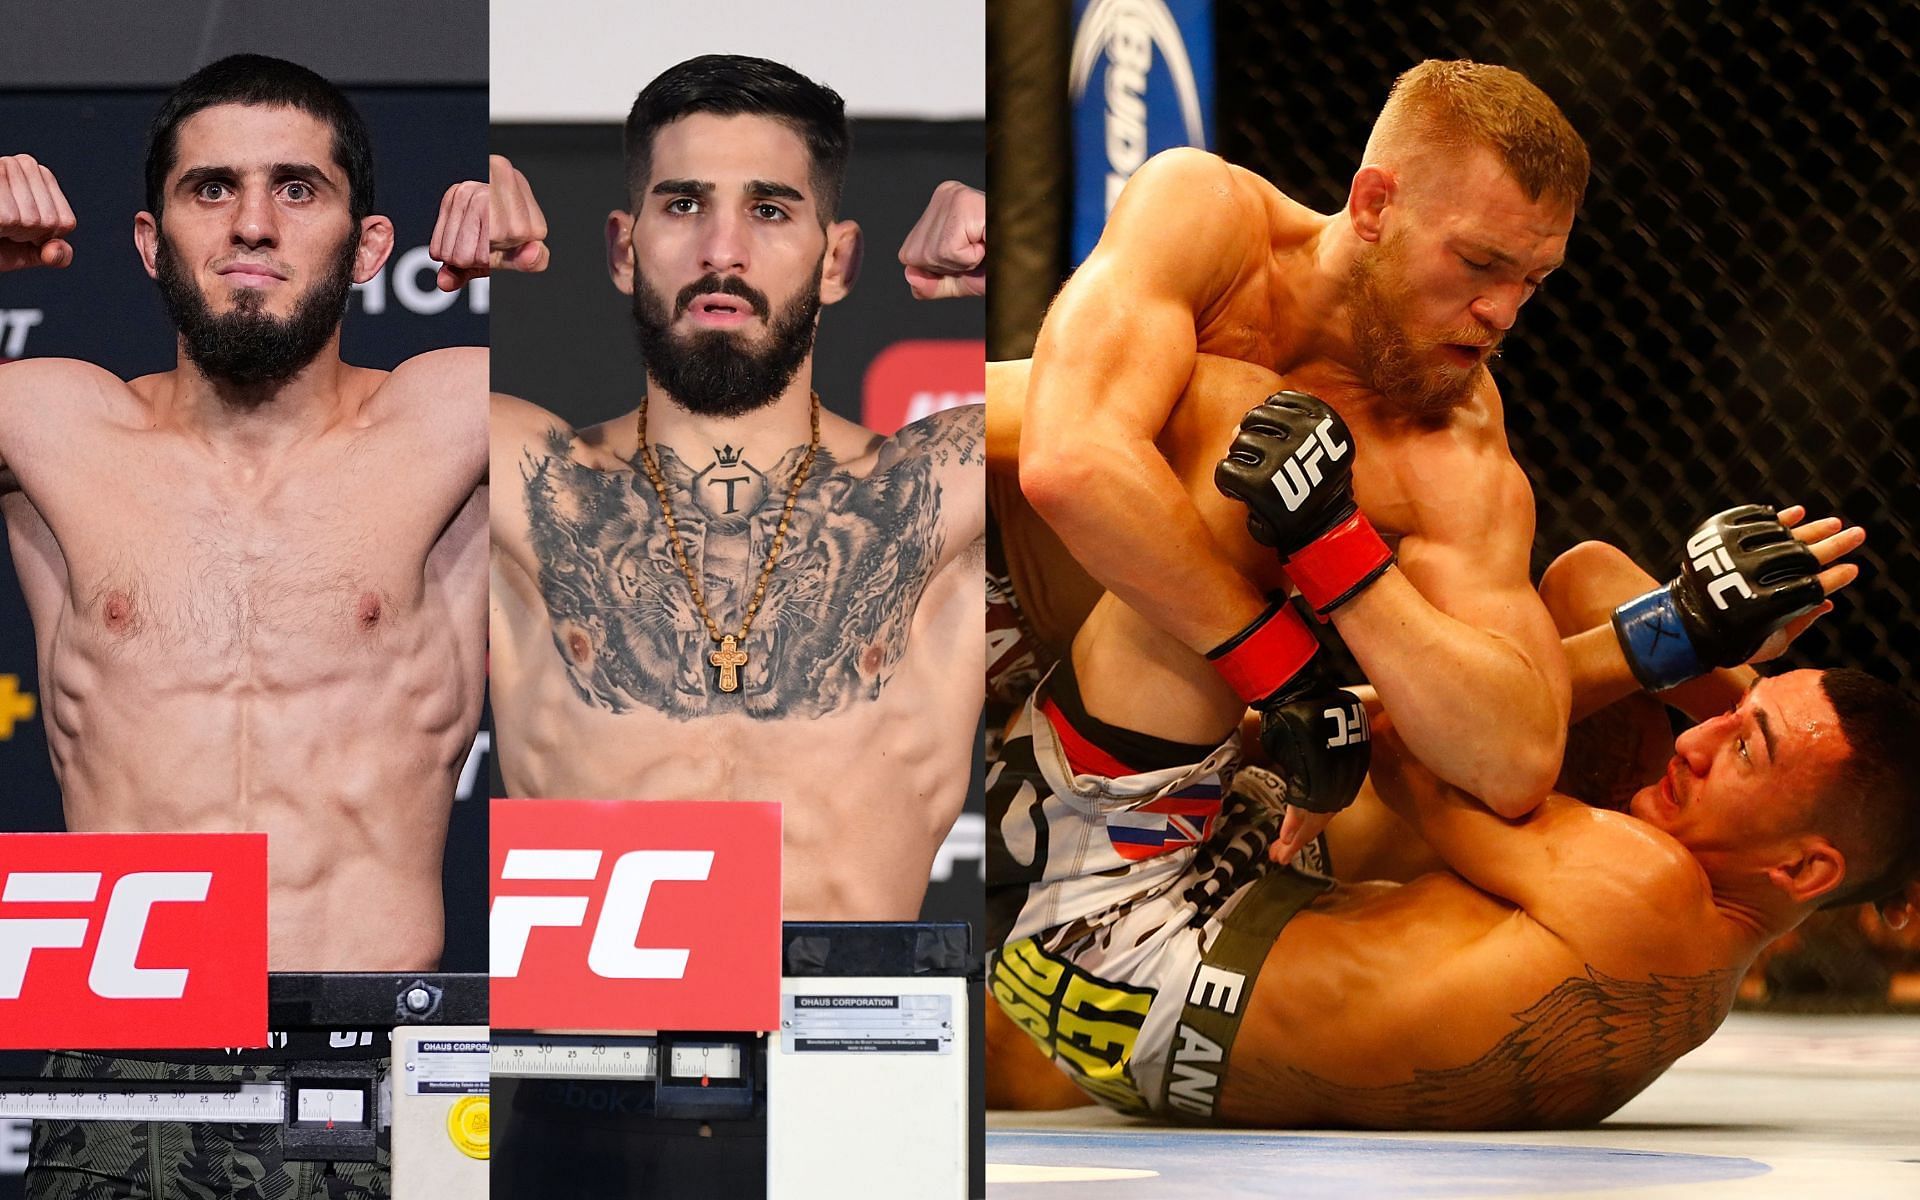 Islam Makhachev and Ilia Topuria (left) and Conor McGregor vs Max Holloway (right). [via Getty Images]